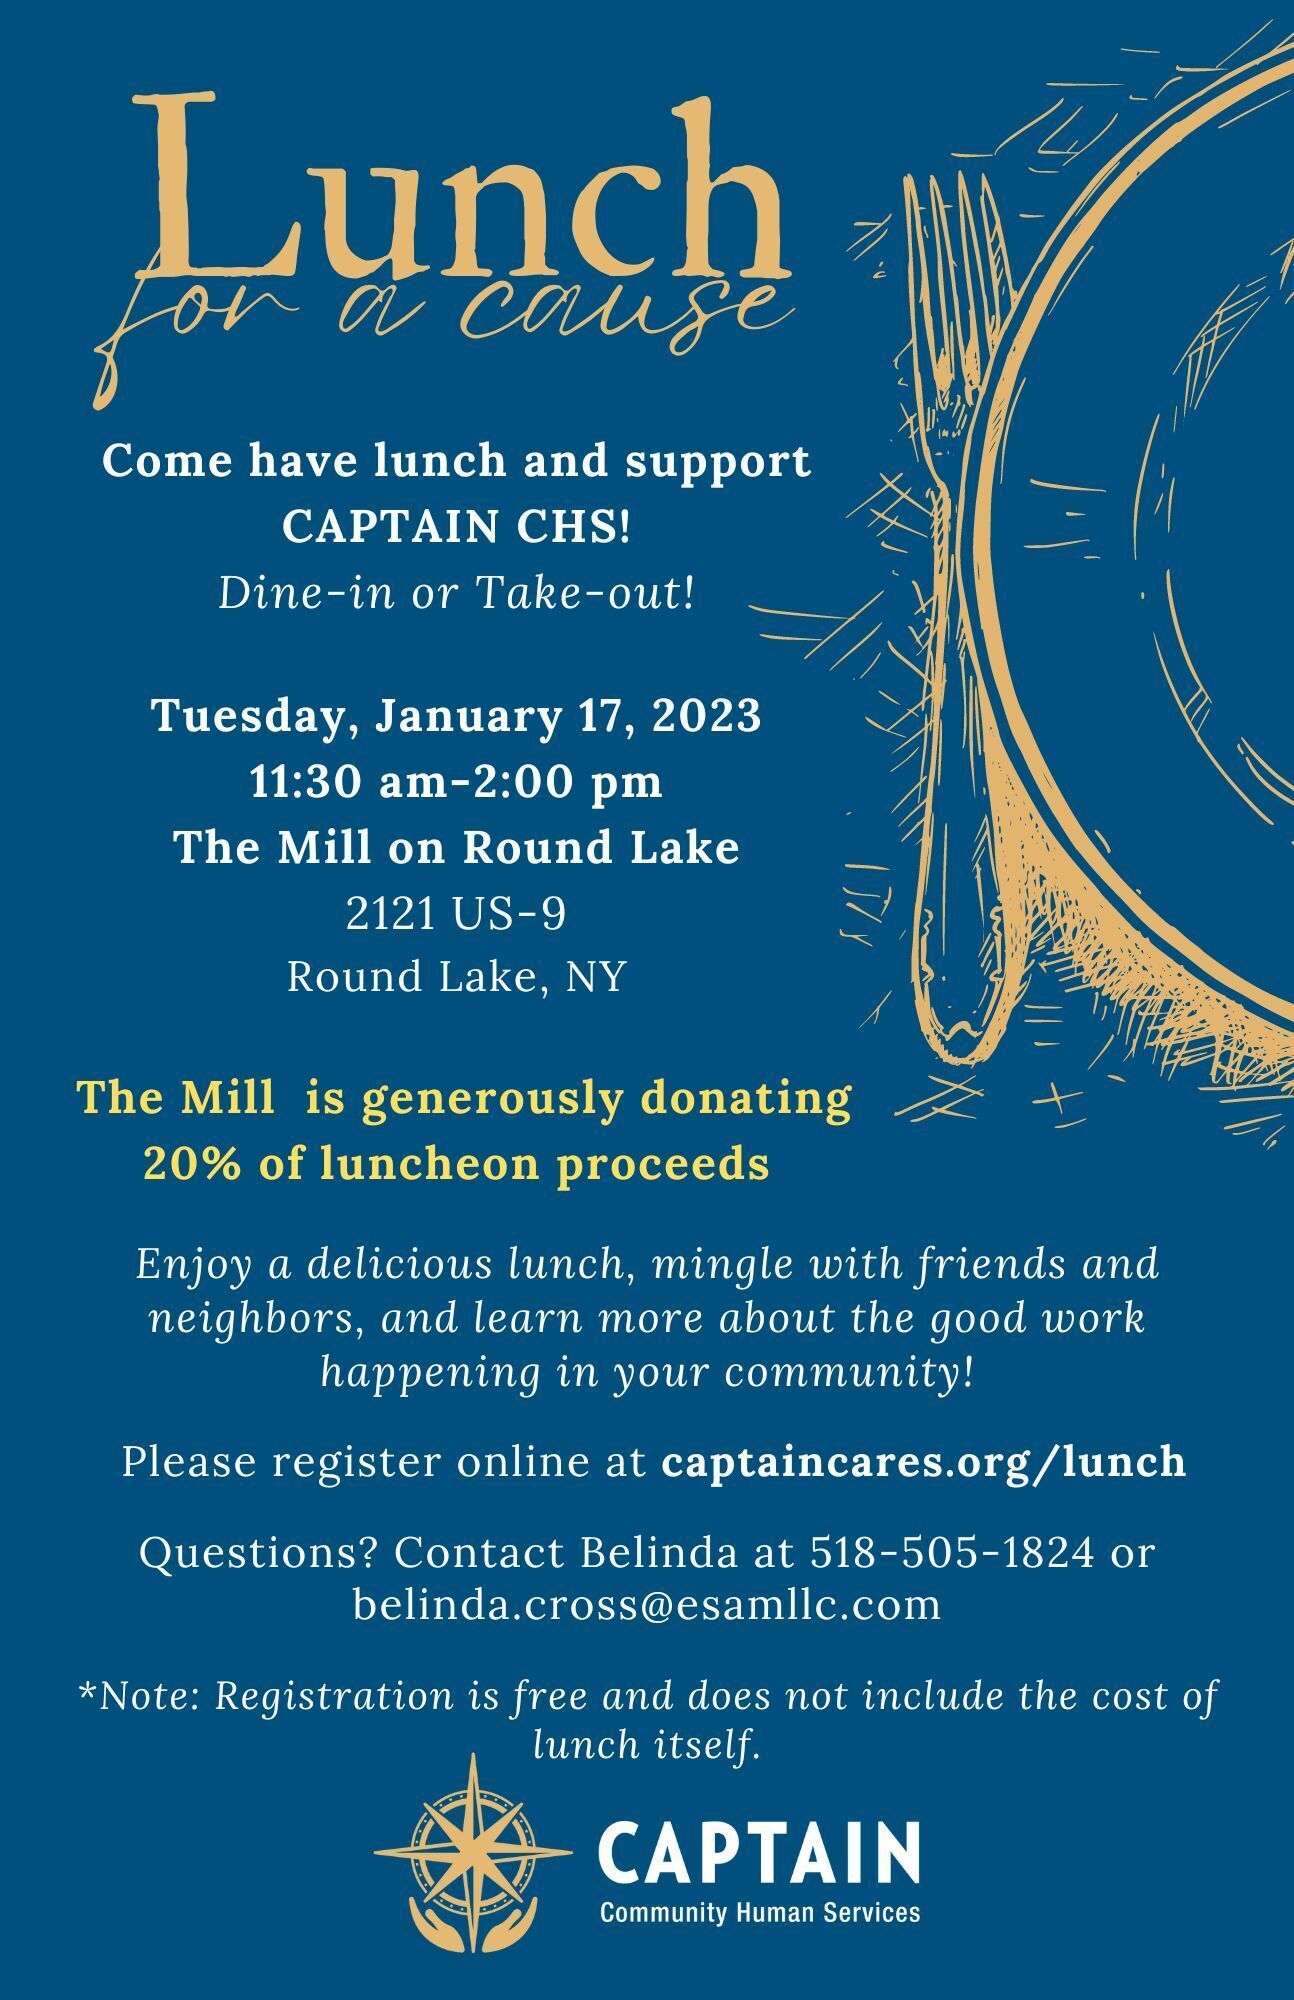 Join us for January's Lunch for a Cause!